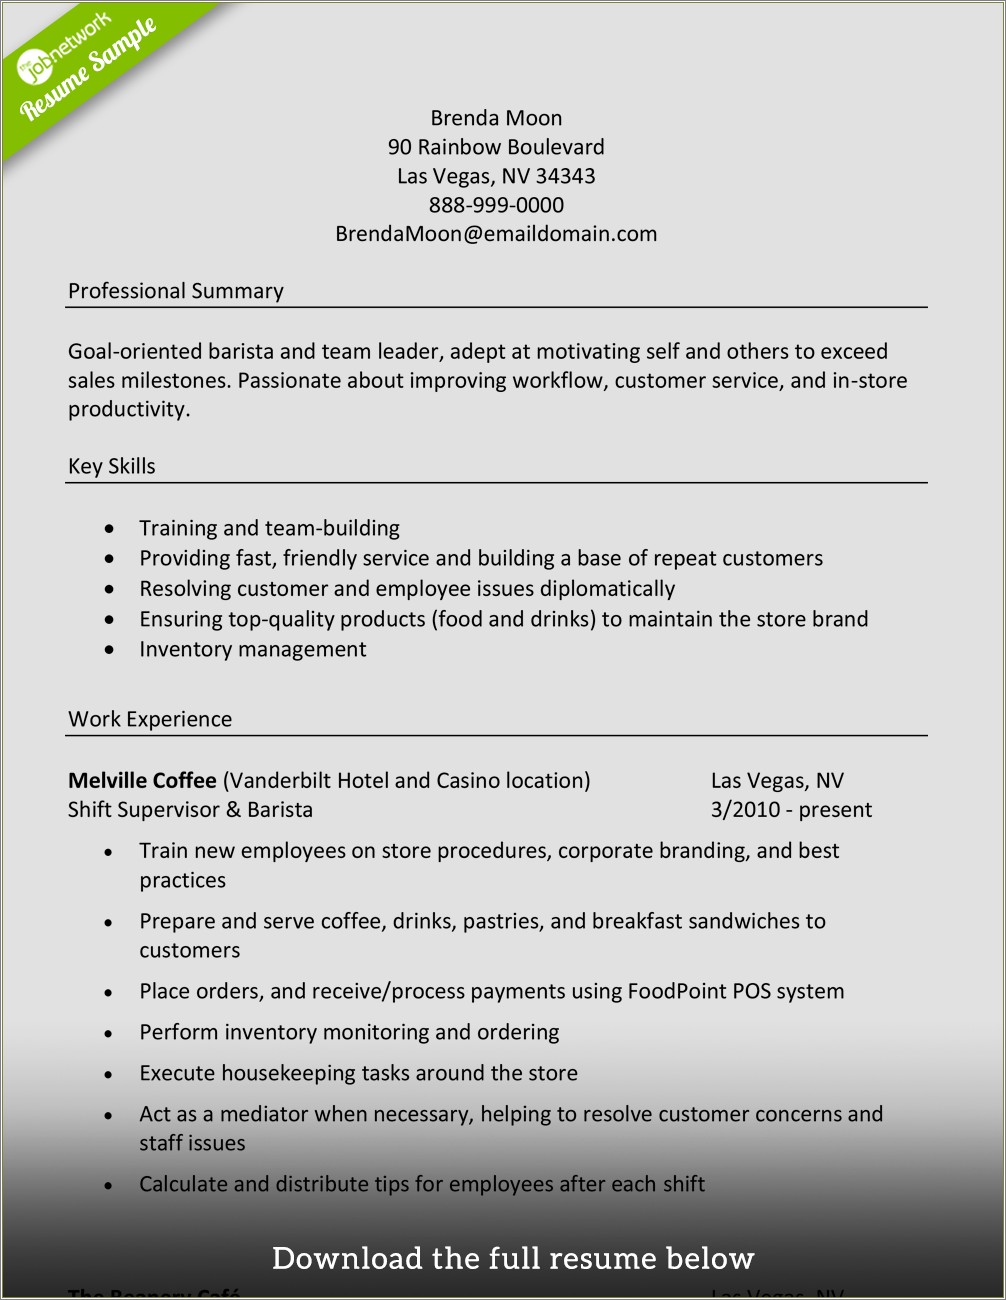 Resumes Of Management Team Members For Coffee Shop